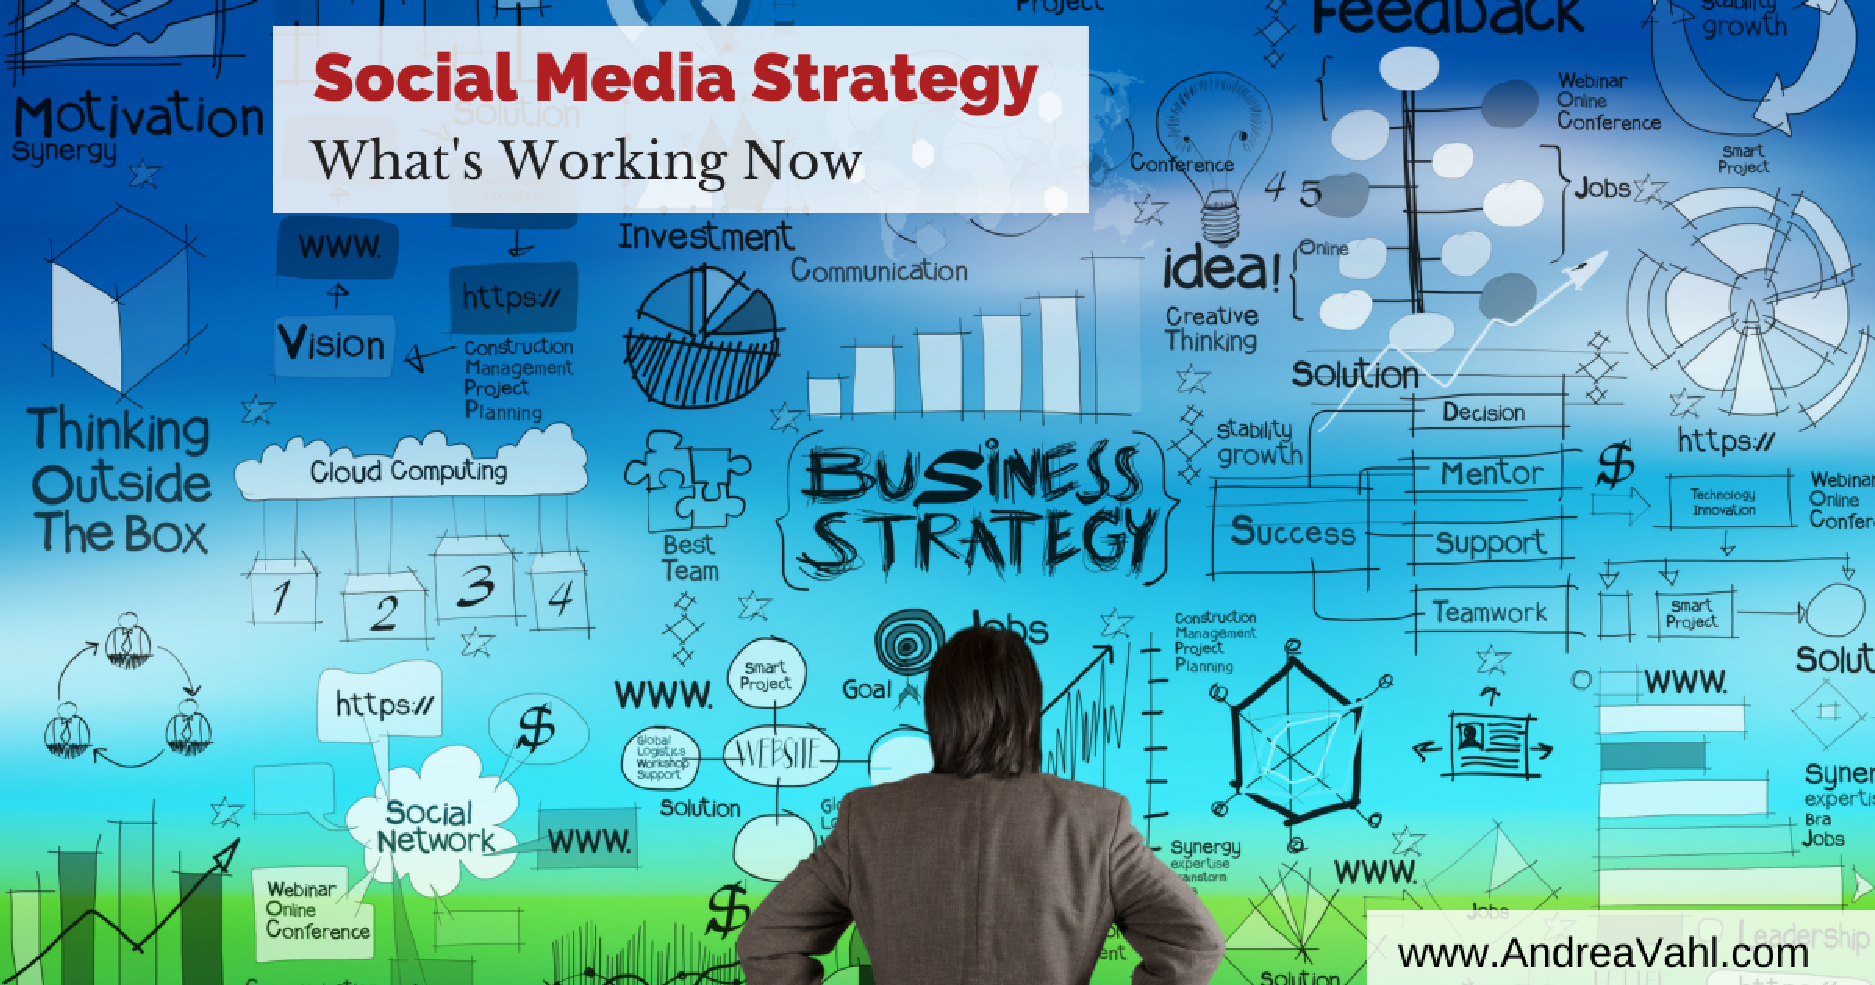 Social Media Strategy: What is Working Now